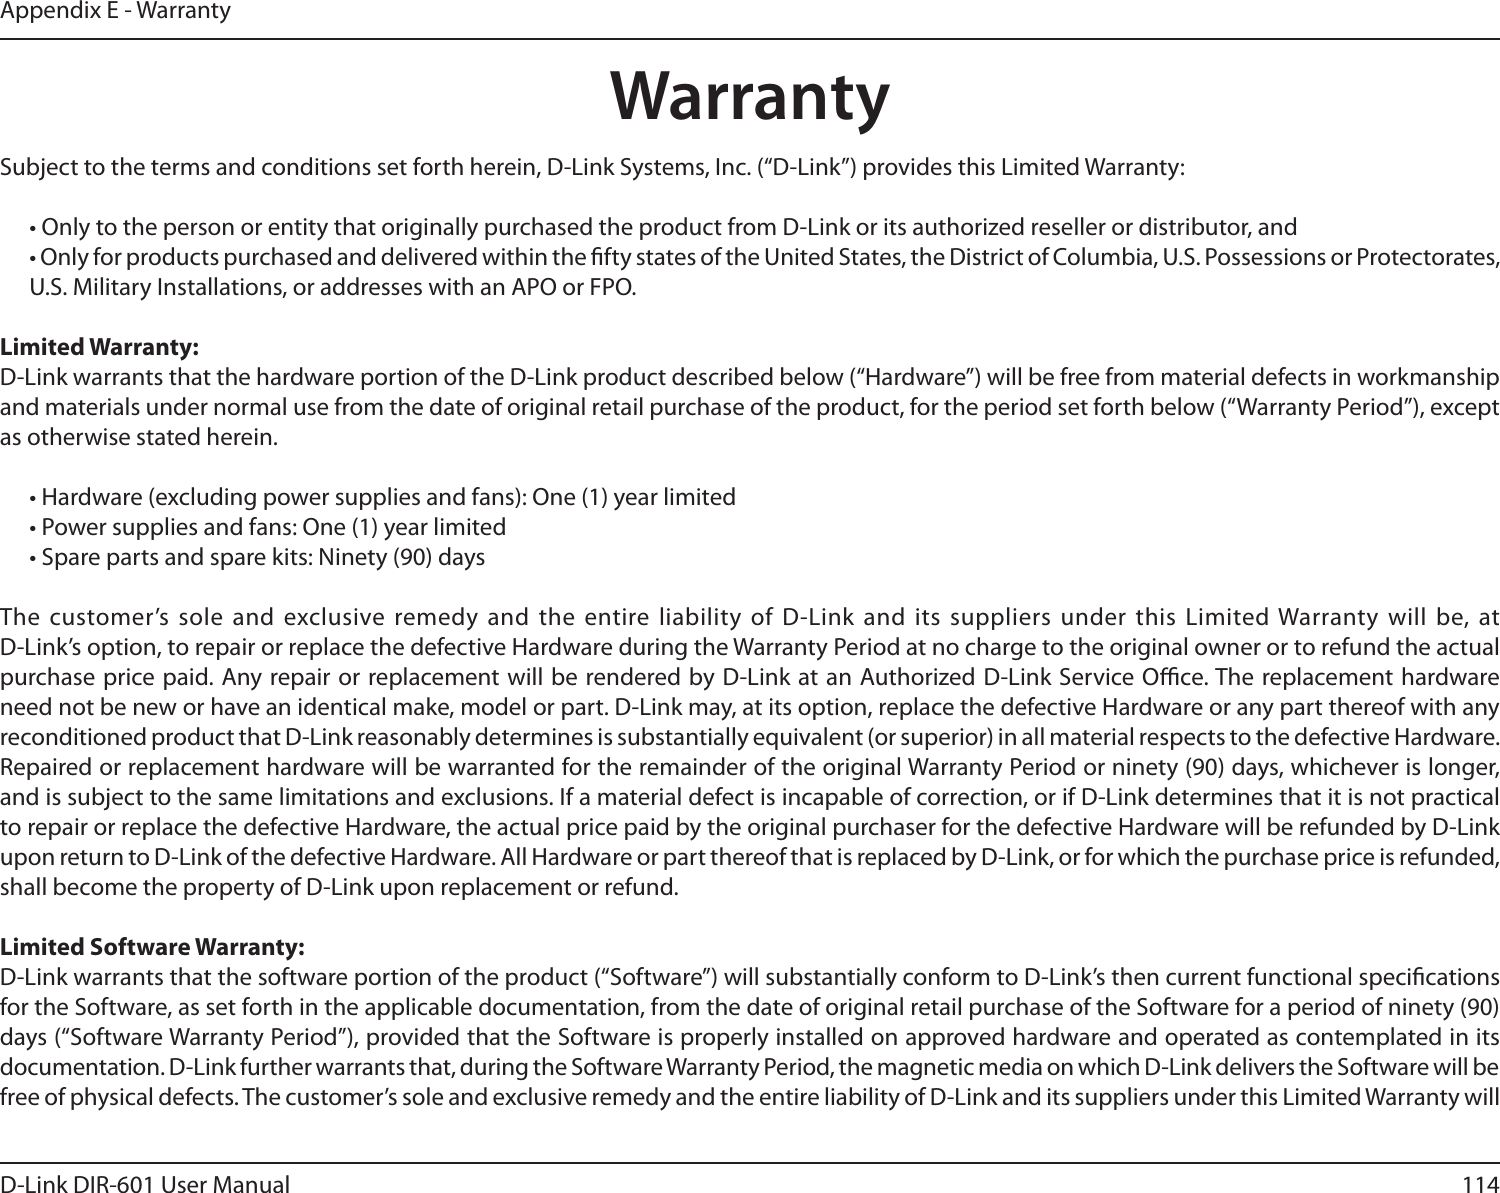 114D-Link DIR-601 User ManualAppendix E - WarrantyWarrantySubject to the terms and conditions set forth herein, D-Link Systems, Inc. (“D-Link”) provides this Limited Warranty:  • Only to the person or entity that originally purchased the product from D-Link or its authorized reseller or distributor, and  • Only for products purchased and delivered within the fty states of the United States, the District of Columbia, U.S. Possessions or Protectorates, U.S. Military Installations, or addresses with an APO or FPO.Limited Warranty:D-Link warrants that the hardware portion of the D-Link product described below (“Hardware”) will be free from material defects in workmanship and materials under normal use from the date of original retail purchase of the product, for the period set forth below (“Warranty Period”), except as otherwise stated herein.  • Hardware (excluding power supplies and fans): One (1) year limited  • Power supplies and fans: One (1) year limited  • Spare parts and spare kits: Ninety (90) daysThe customer’s sole and  exclusive remedy and the  entire liability  of D-Link  and its suppliers  under this Limited Warranty will be, at  D-Link’s option, to repair or replace the defective Hardware during the Warranty Period at no charge to the original owner or to refund the actual purchase price paid. Any repair or replacement will be rendered by D-Link at an Authorized D-Link Service Oce. The replacement hardware need not be new or have an identical make, model or part. D-Link may, at its option, replace the defective Hardware or any part thereof with any reconditioned product that D-Link reasonably determines is substantially equivalent (or superior) in all material respects to the defective Hardware. Repaired or replacement hardware will be warranted for the remainder of the original Warranty Period or ninety (90) days, whichever is longer, and is subject to the same limitations and exclusions. If a material defect is incapable of correction, or if D-Link determines that it is not practical to repair or replace the defective Hardware, the actual price paid by the original purchaser for the defective Hardware will be refunded by D-Link upon return to D-Link of the defective Hardware. All Hardware or part thereof that is replaced by D-Link, or for which the purchase price is refunded, shall become the property of D-Link upon replacement or refund.LimitedSoftwareWarranty:D-Link warrants that the software portion of the product (“Software”) will substantially conform to D-Link’s then current functional specications for the Software, as set forth in the applicable documentation, from the date of original retail purchase of the Software for a period of ninety (90) days (“Software Warranty Period”), provided that the Software is properly installed on approved hardware and operated as contemplated in its documentation. D-Link further warrants that, during the Software Warranty Period, the magnetic media on which D-Link delivers the Software will be free of physical defects. The customer’s sole and exclusive remedy and the entire liability of D-Link and its suppliers under this Limited Warranty will 